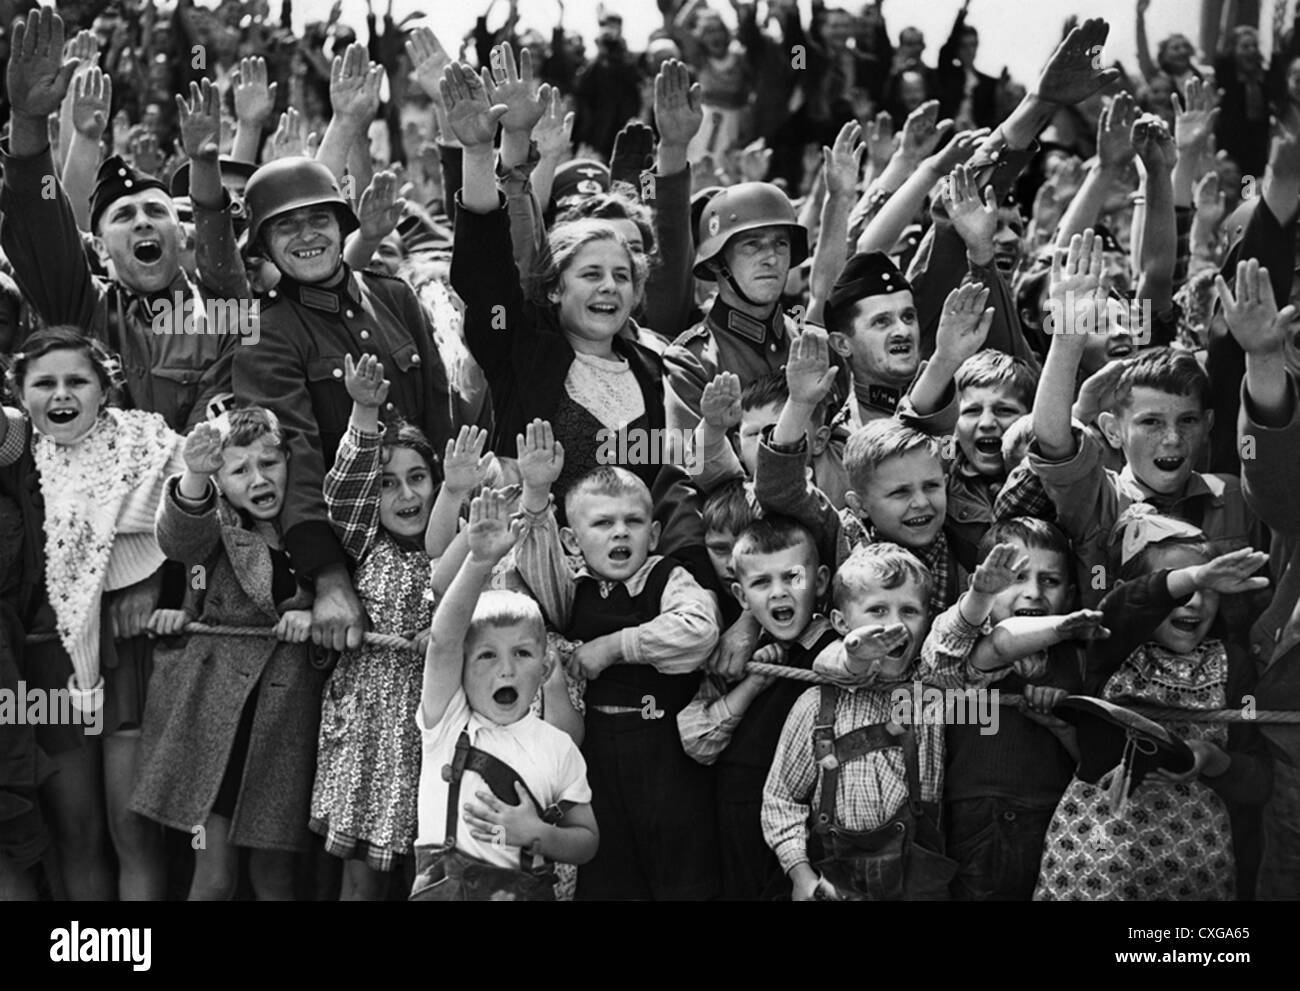 german-children-and-soldiers-give-the-nazi-salute-during-parade-CXGA65.jpg